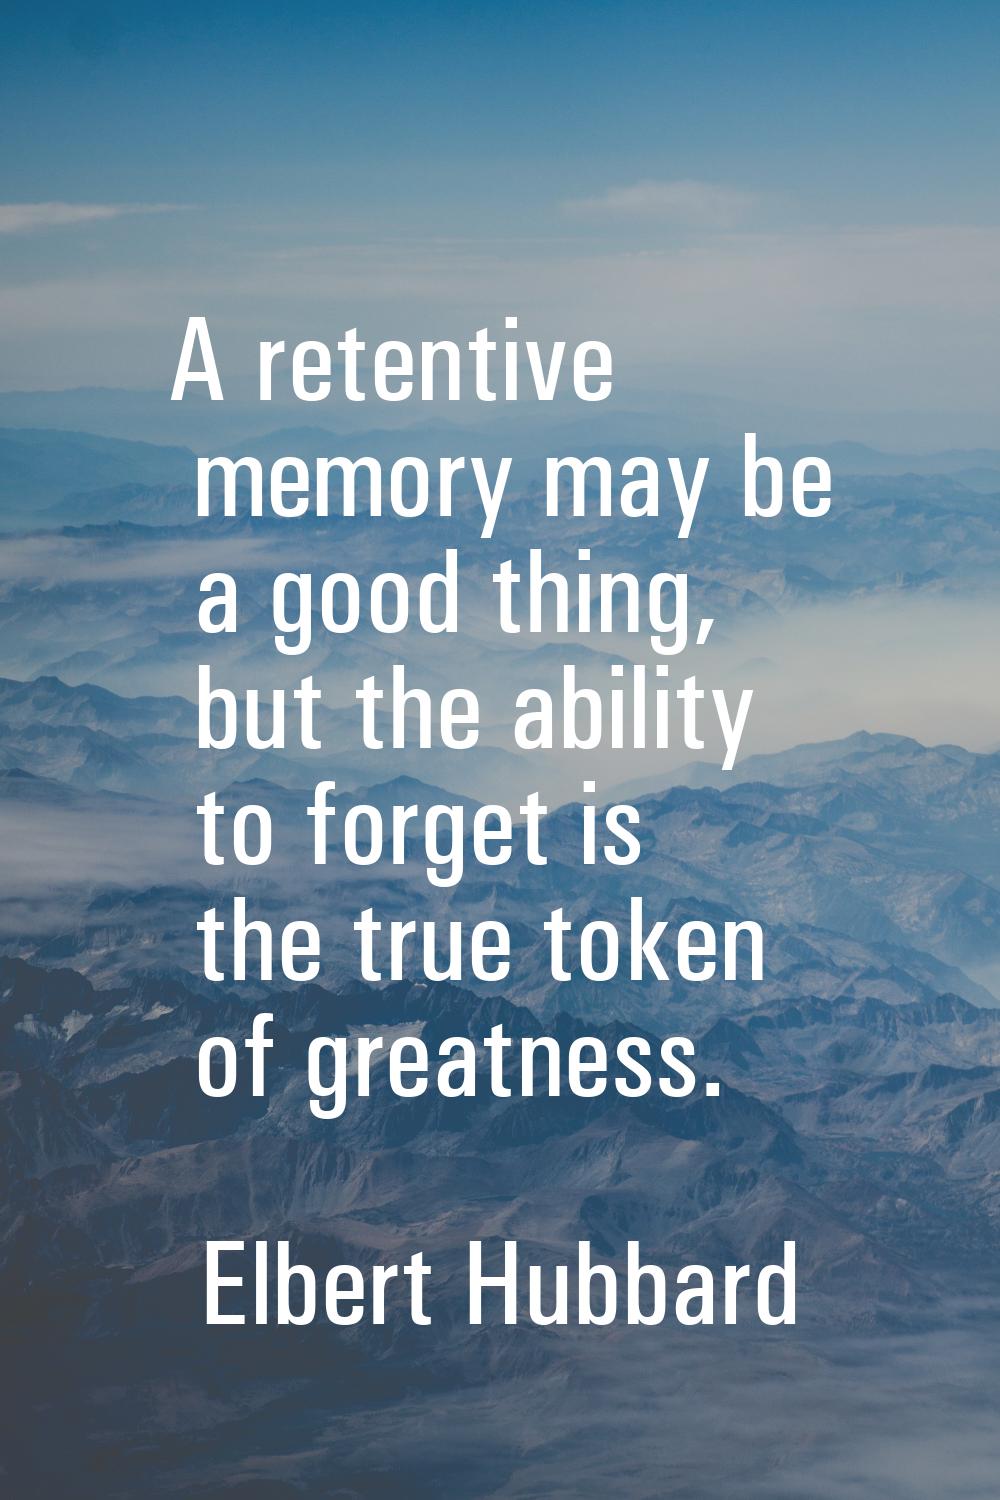 A retentive memory may be a good thing, but the ability to forget is the true token of greatness.